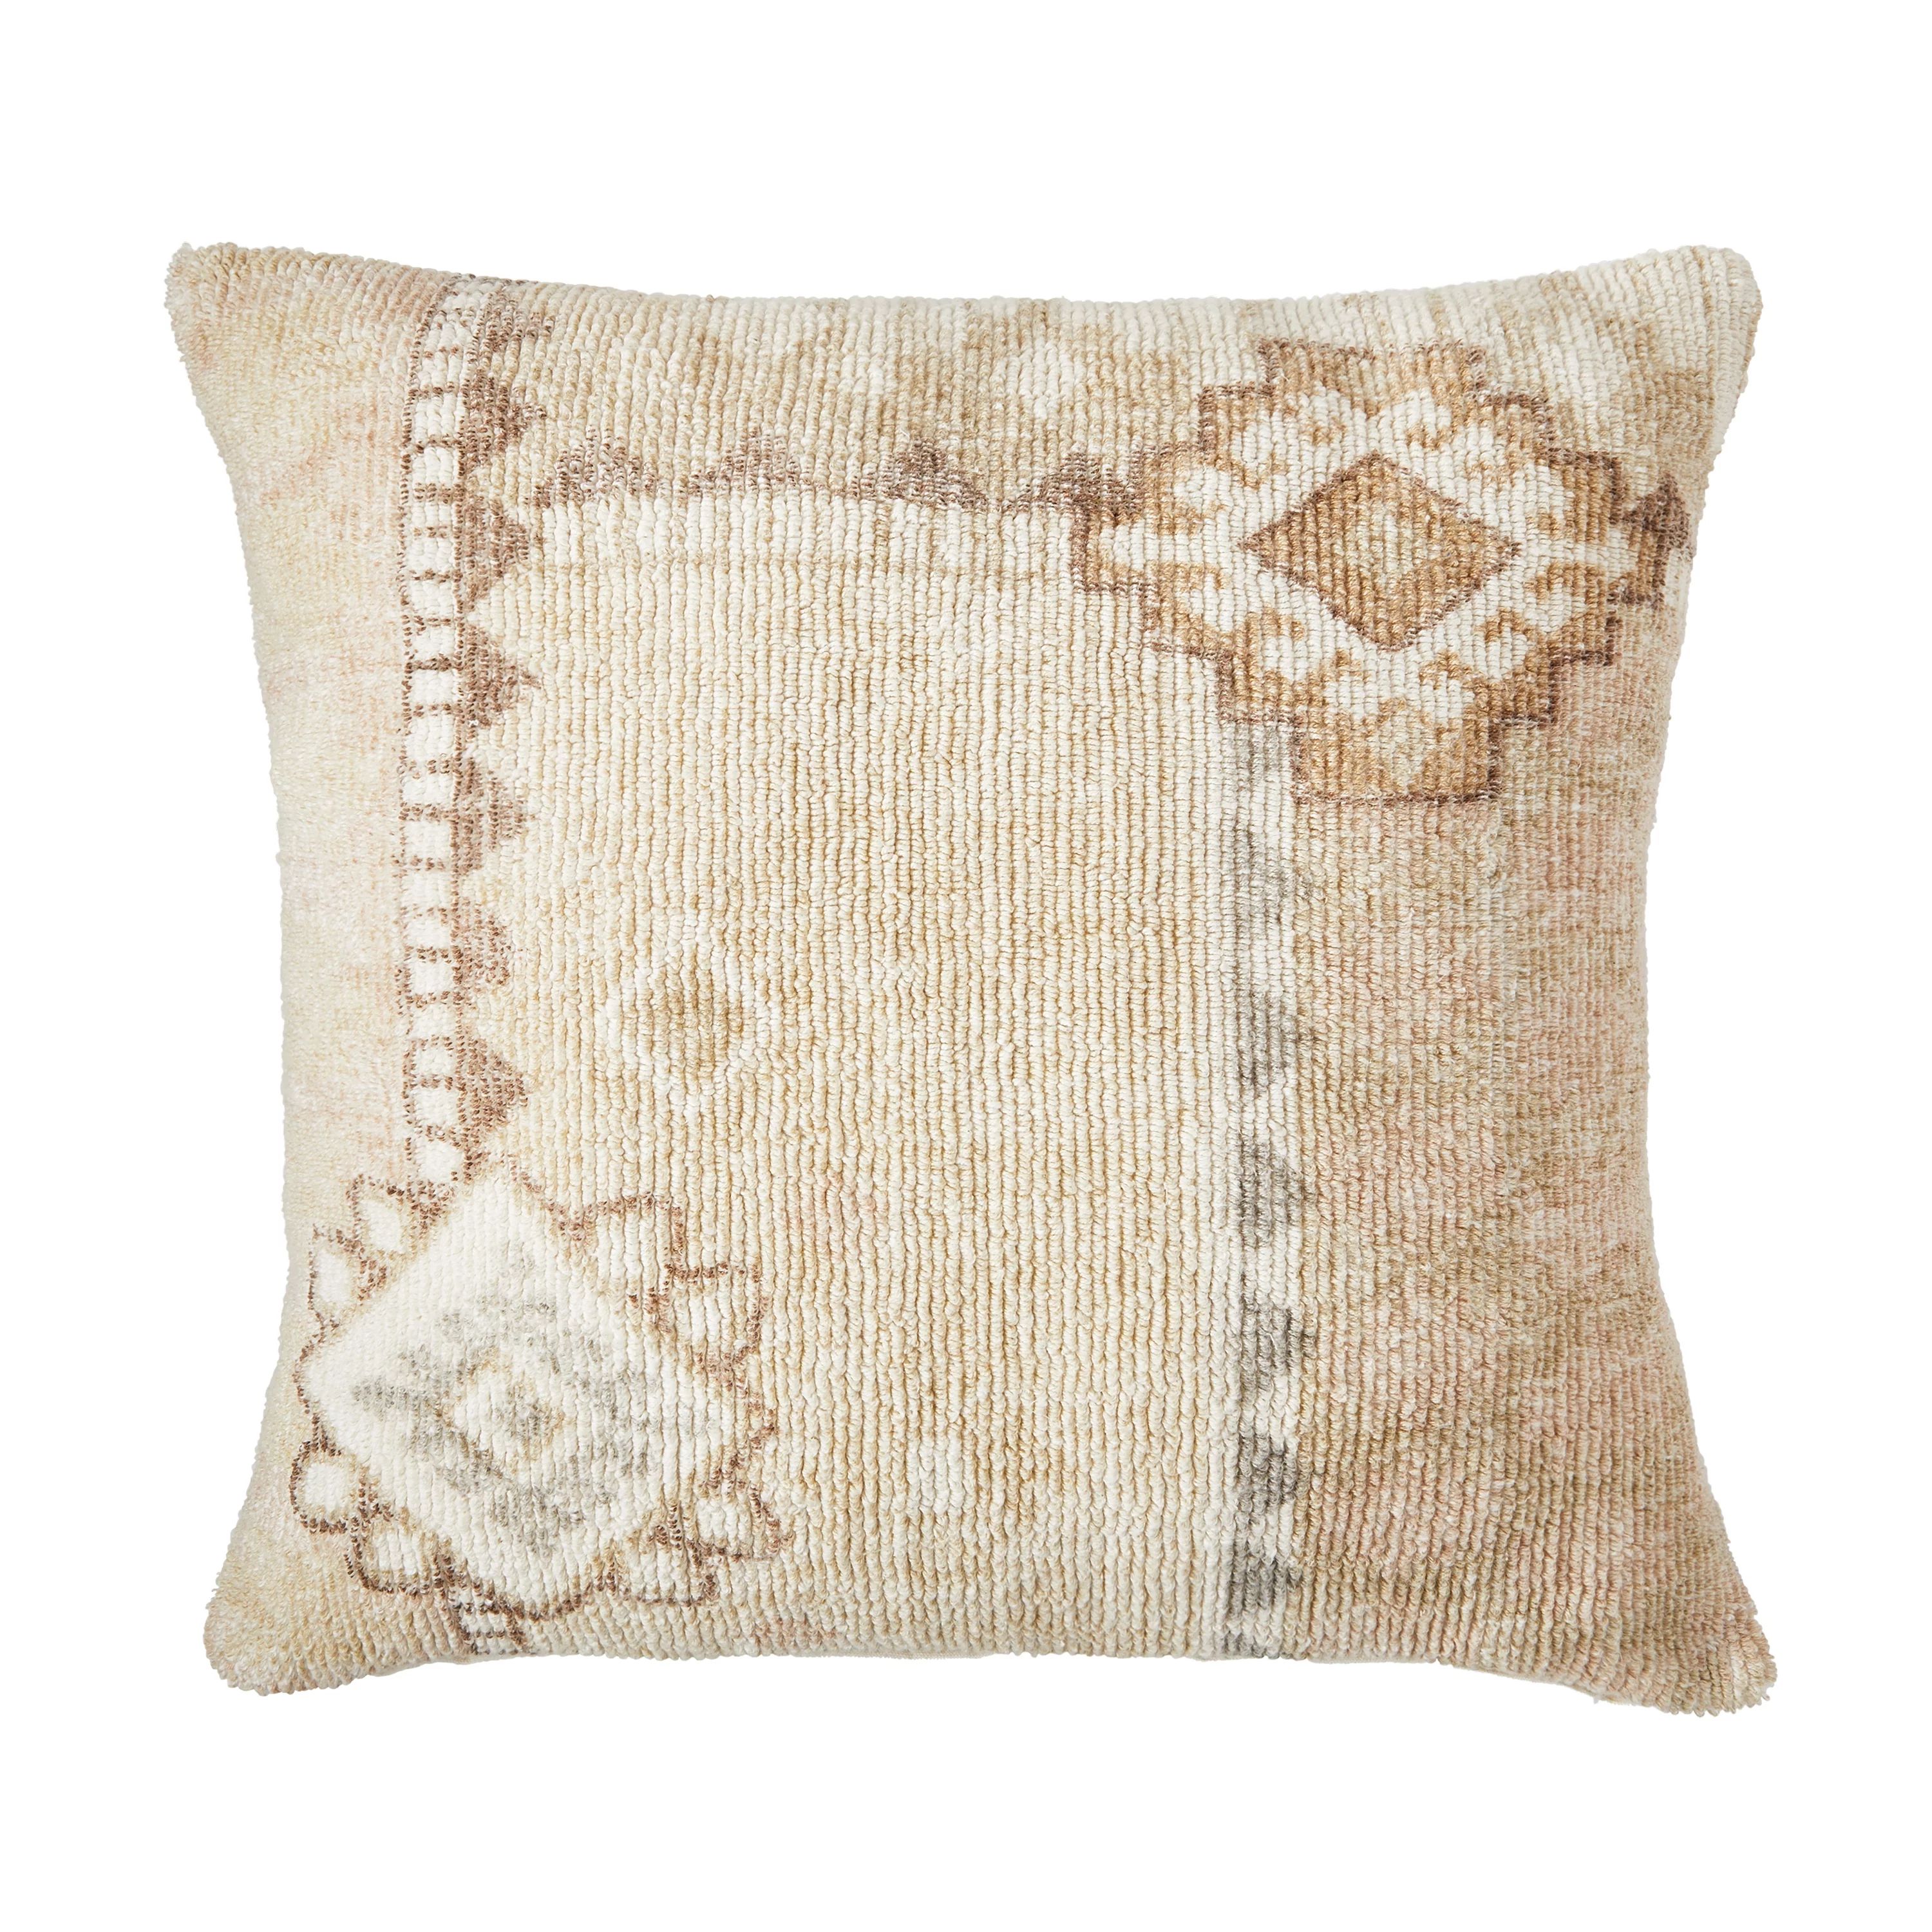 Better Homes & Gardens Beige Persian Patchwork 22" x 22" Pillow by Dave & Jenny Marrs | Walmart (US)